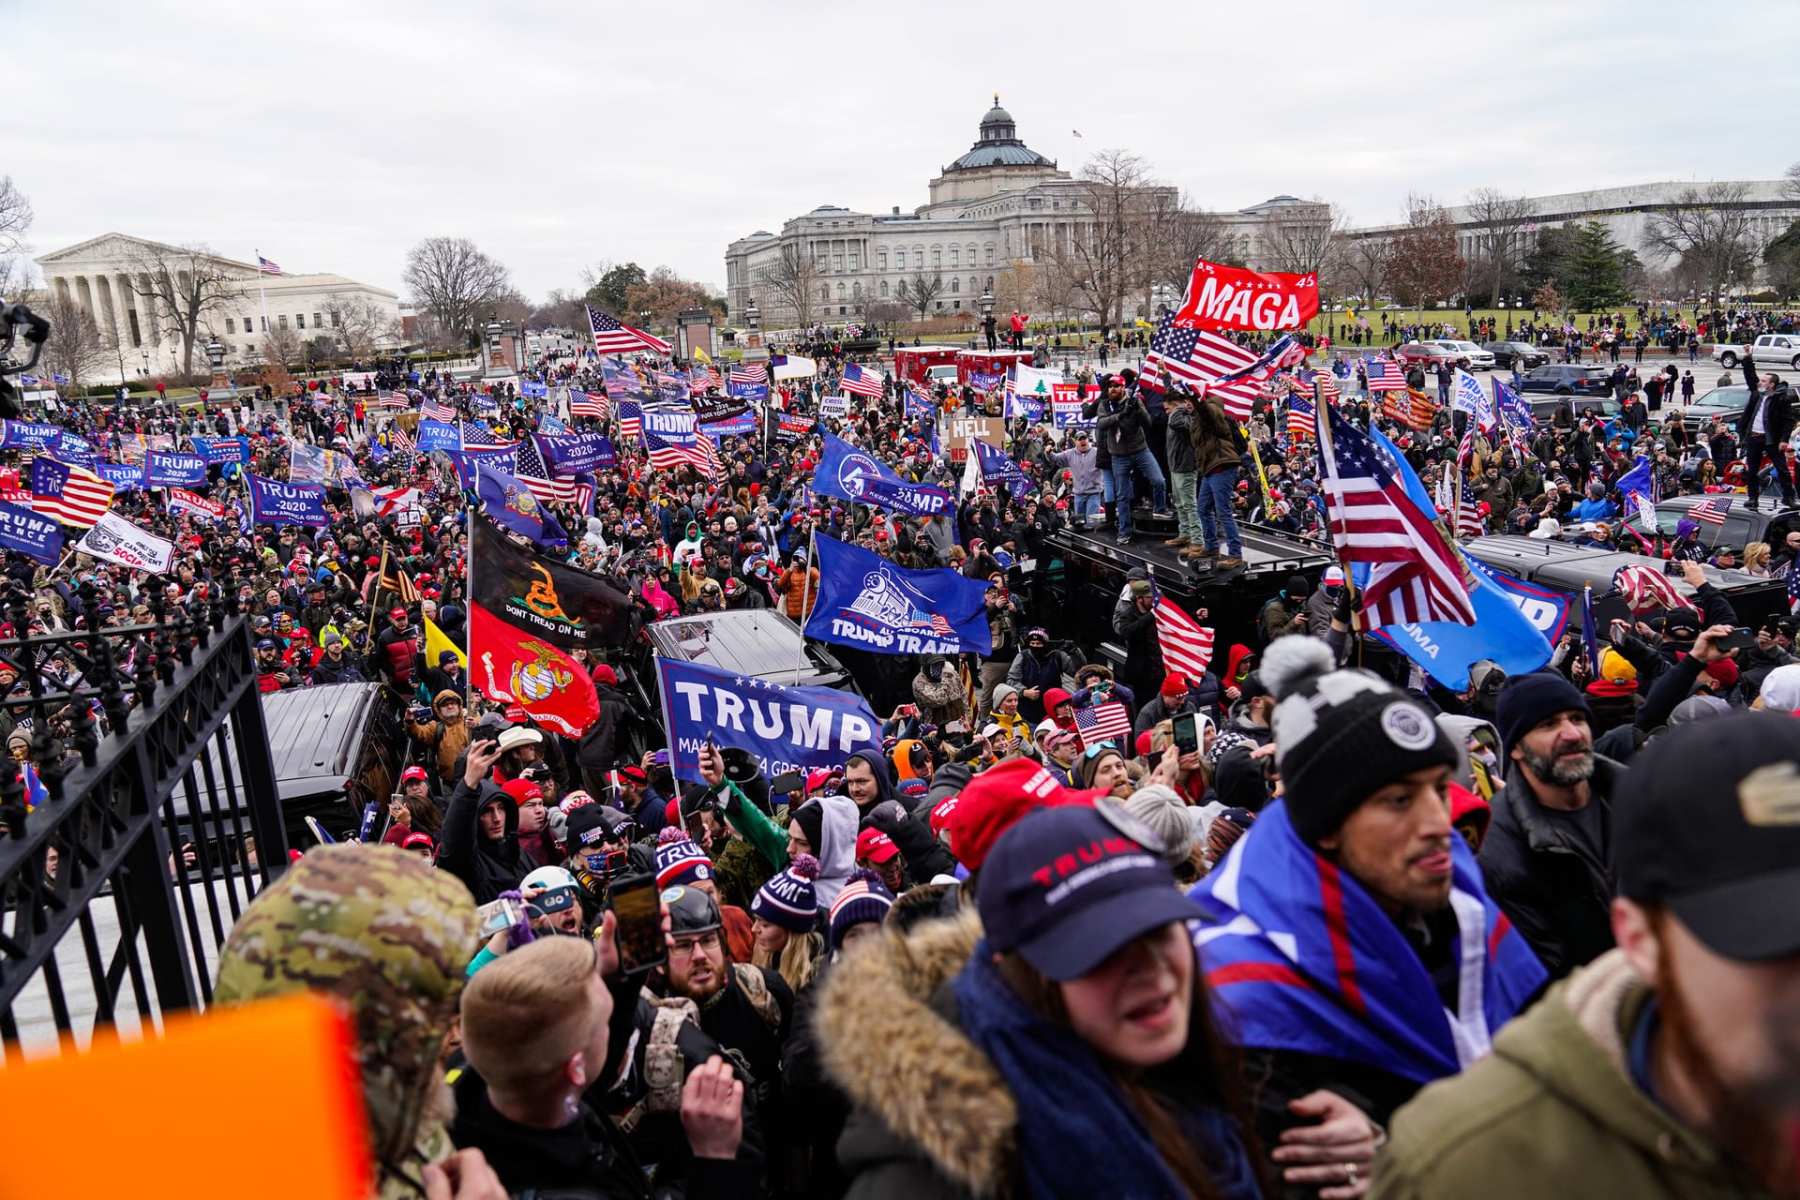 A crowd of pro-Trump supporters riot in front of the Capitol.